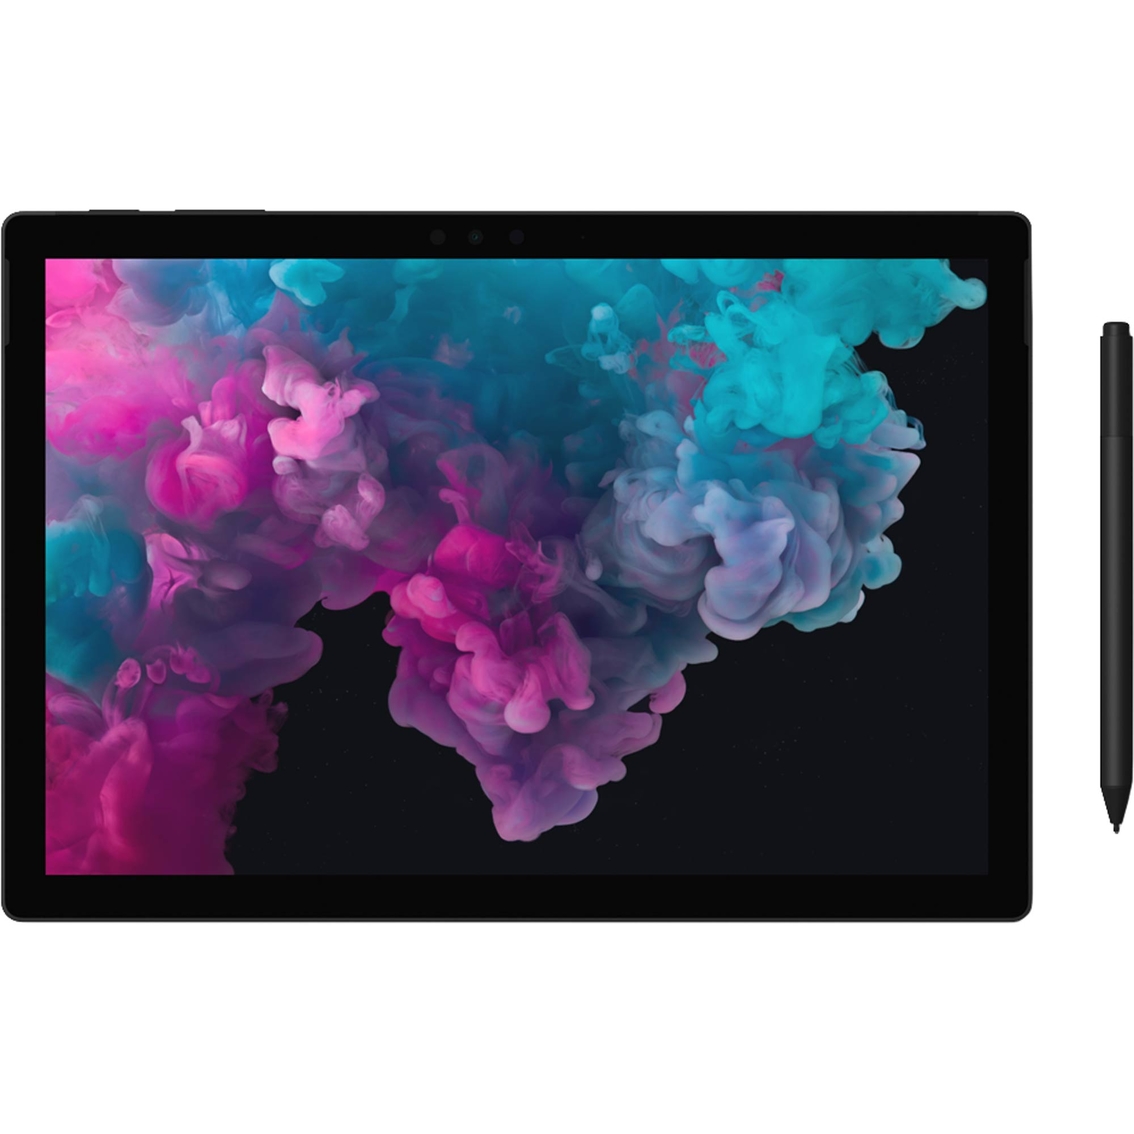 Microsoft Surface Pro 6 12.3 in. Touchscreen Intel i7 16GB RAM 512GB SSD Tablet - Image 6 of 7